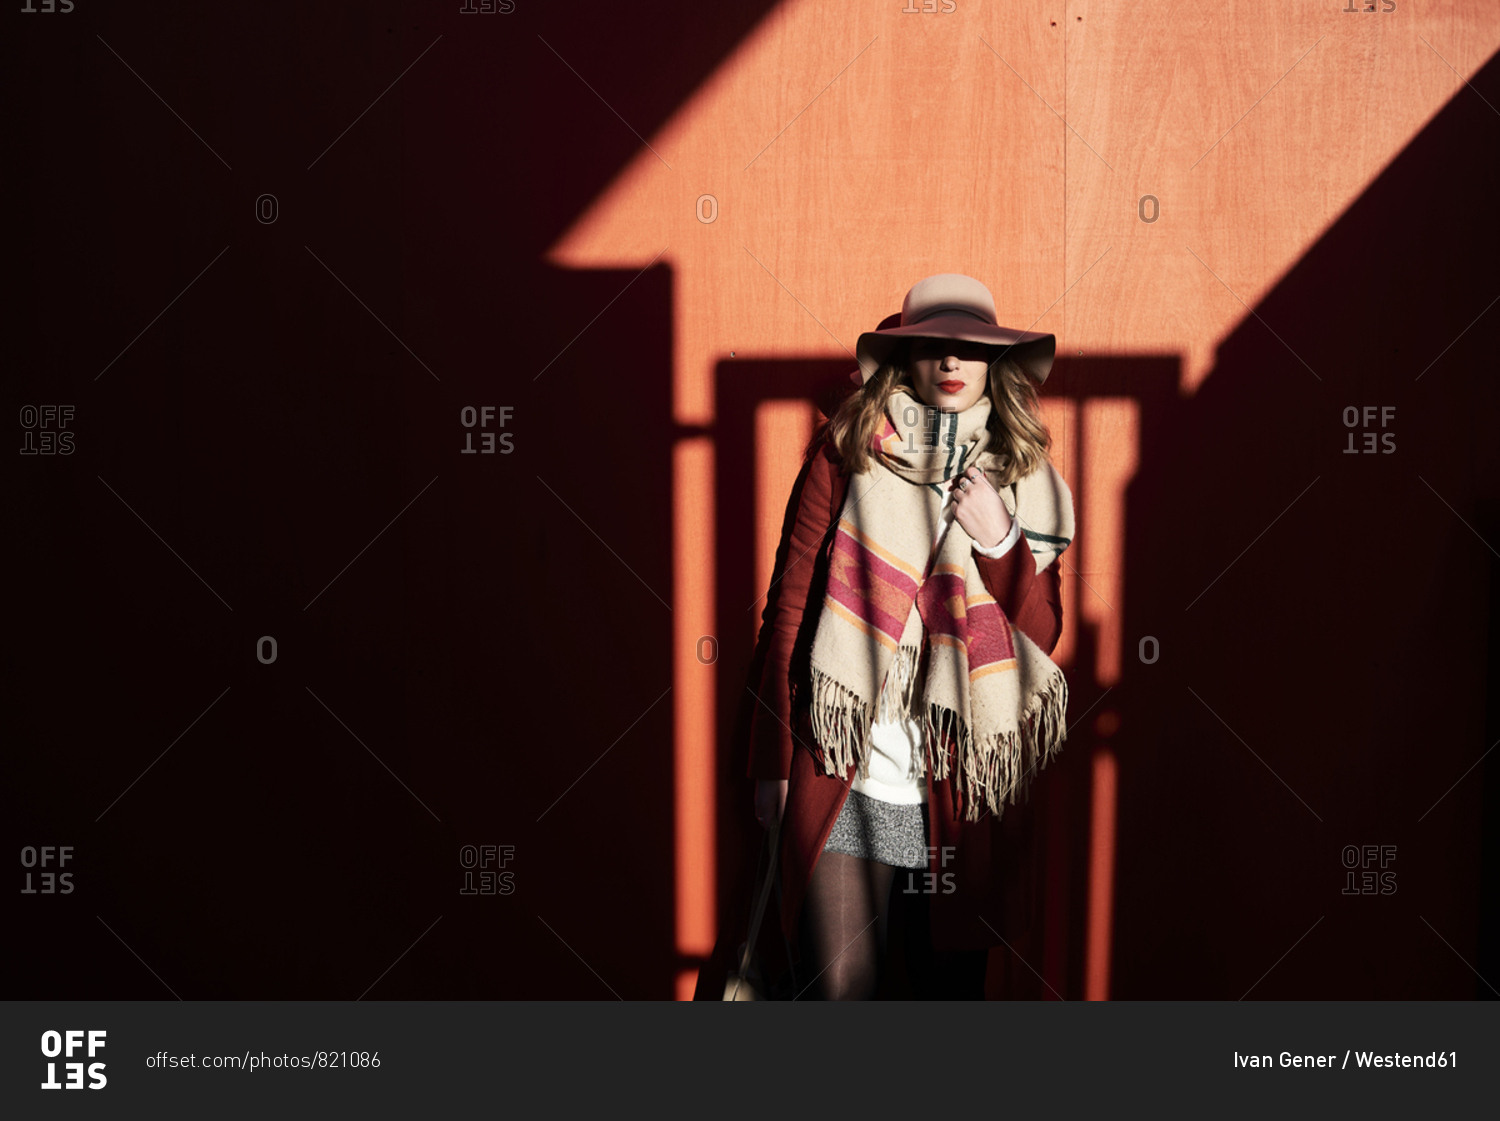 Stylish woman wearing a floppy hat in light and shadow